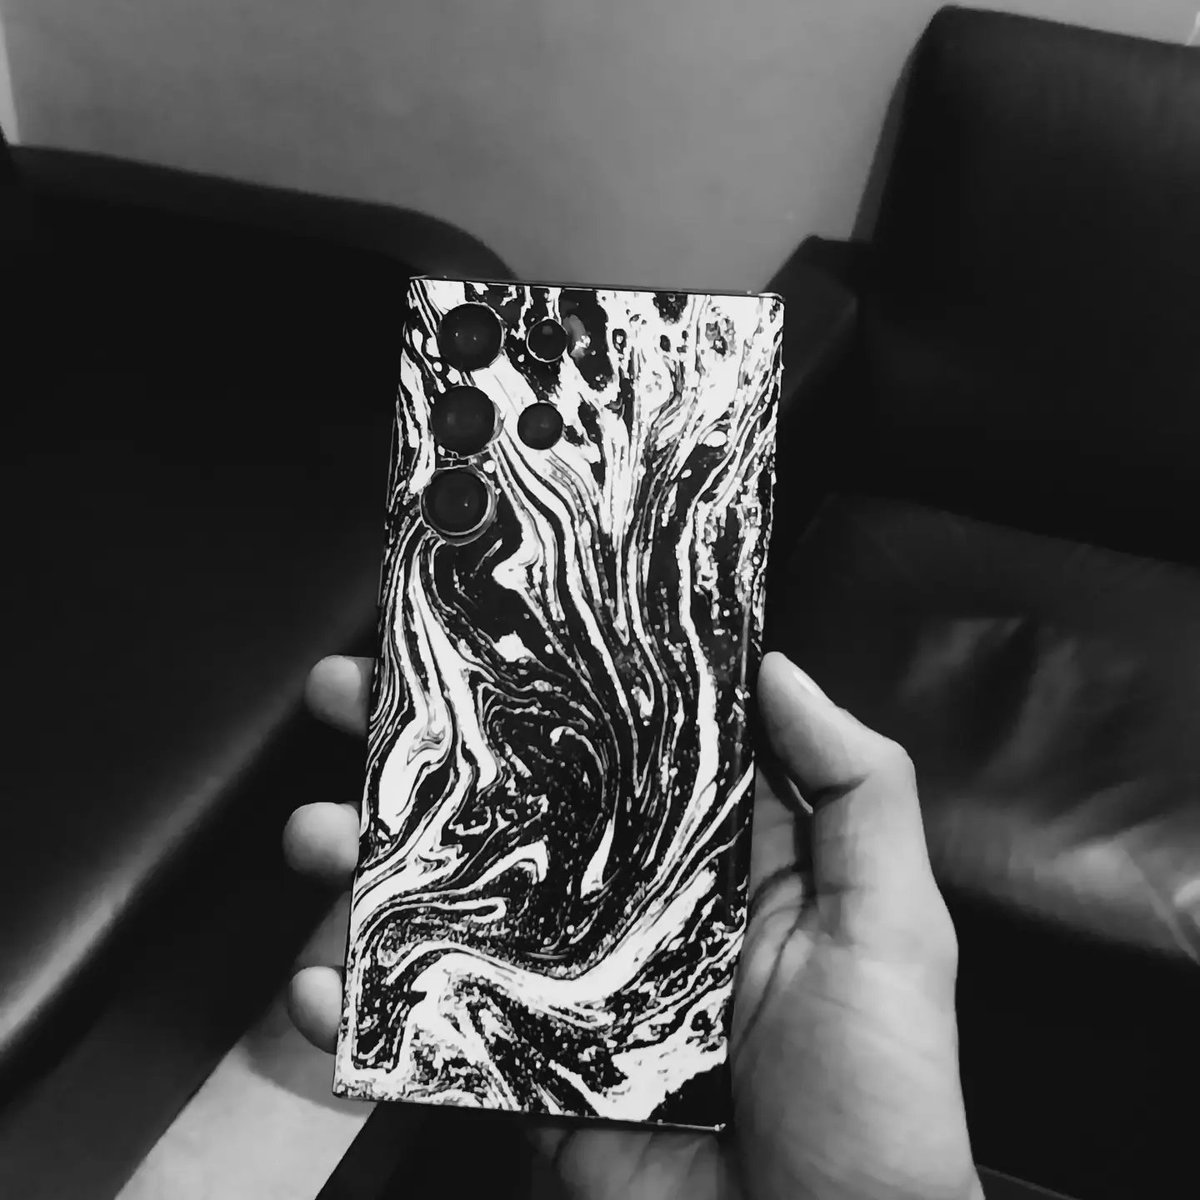 Fall in love with the beauty of black and white.
.
.
.
Buy Now At stickover.in 
#ownyourskin #mobileskin #black #blackandwhite #darkart #design #s22ultra #SamsungGalaxy #stickover